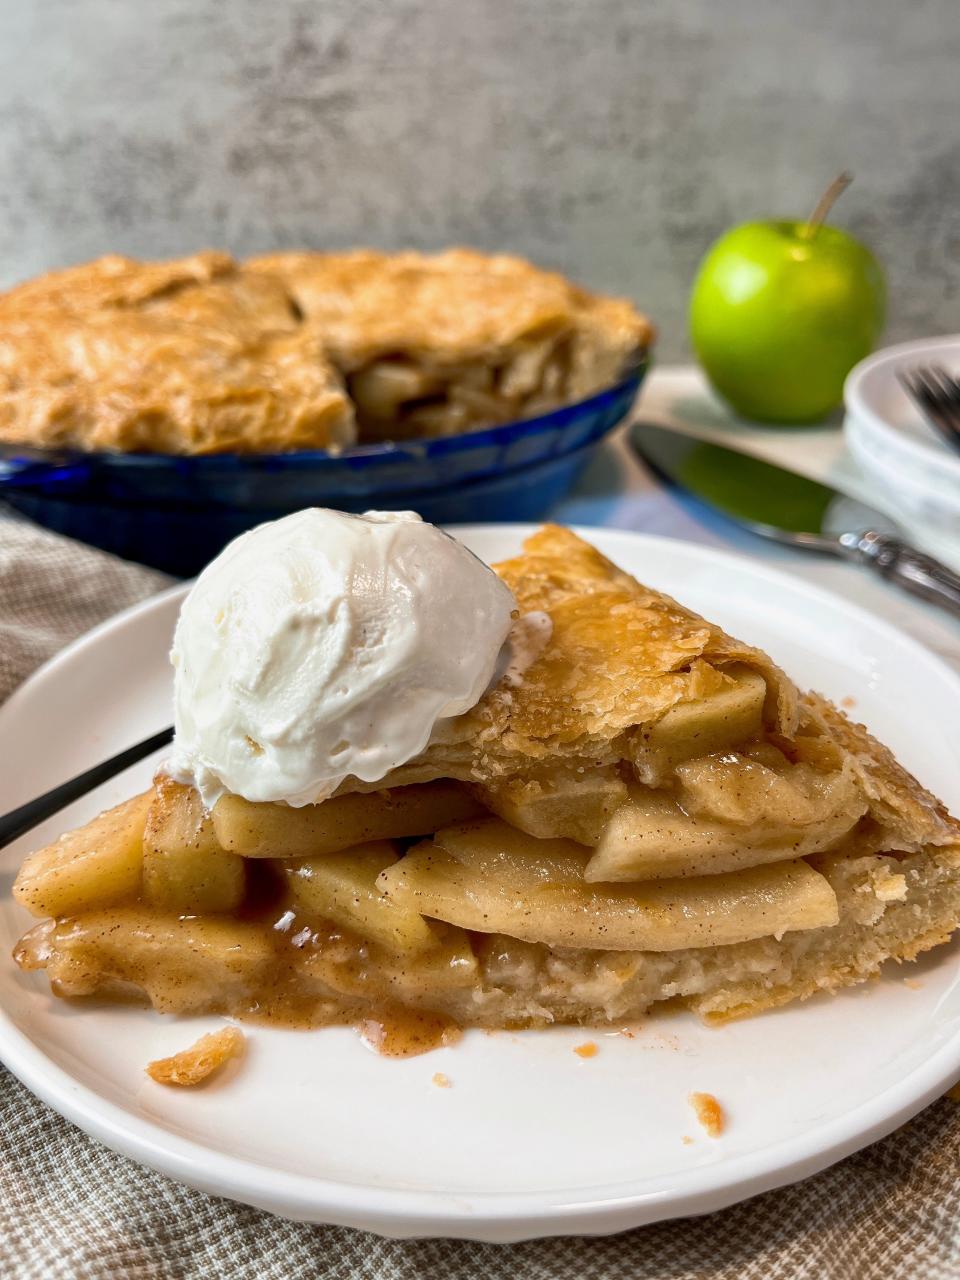 Top your apple pie with fresh whipped cream or vanilla ice cream.